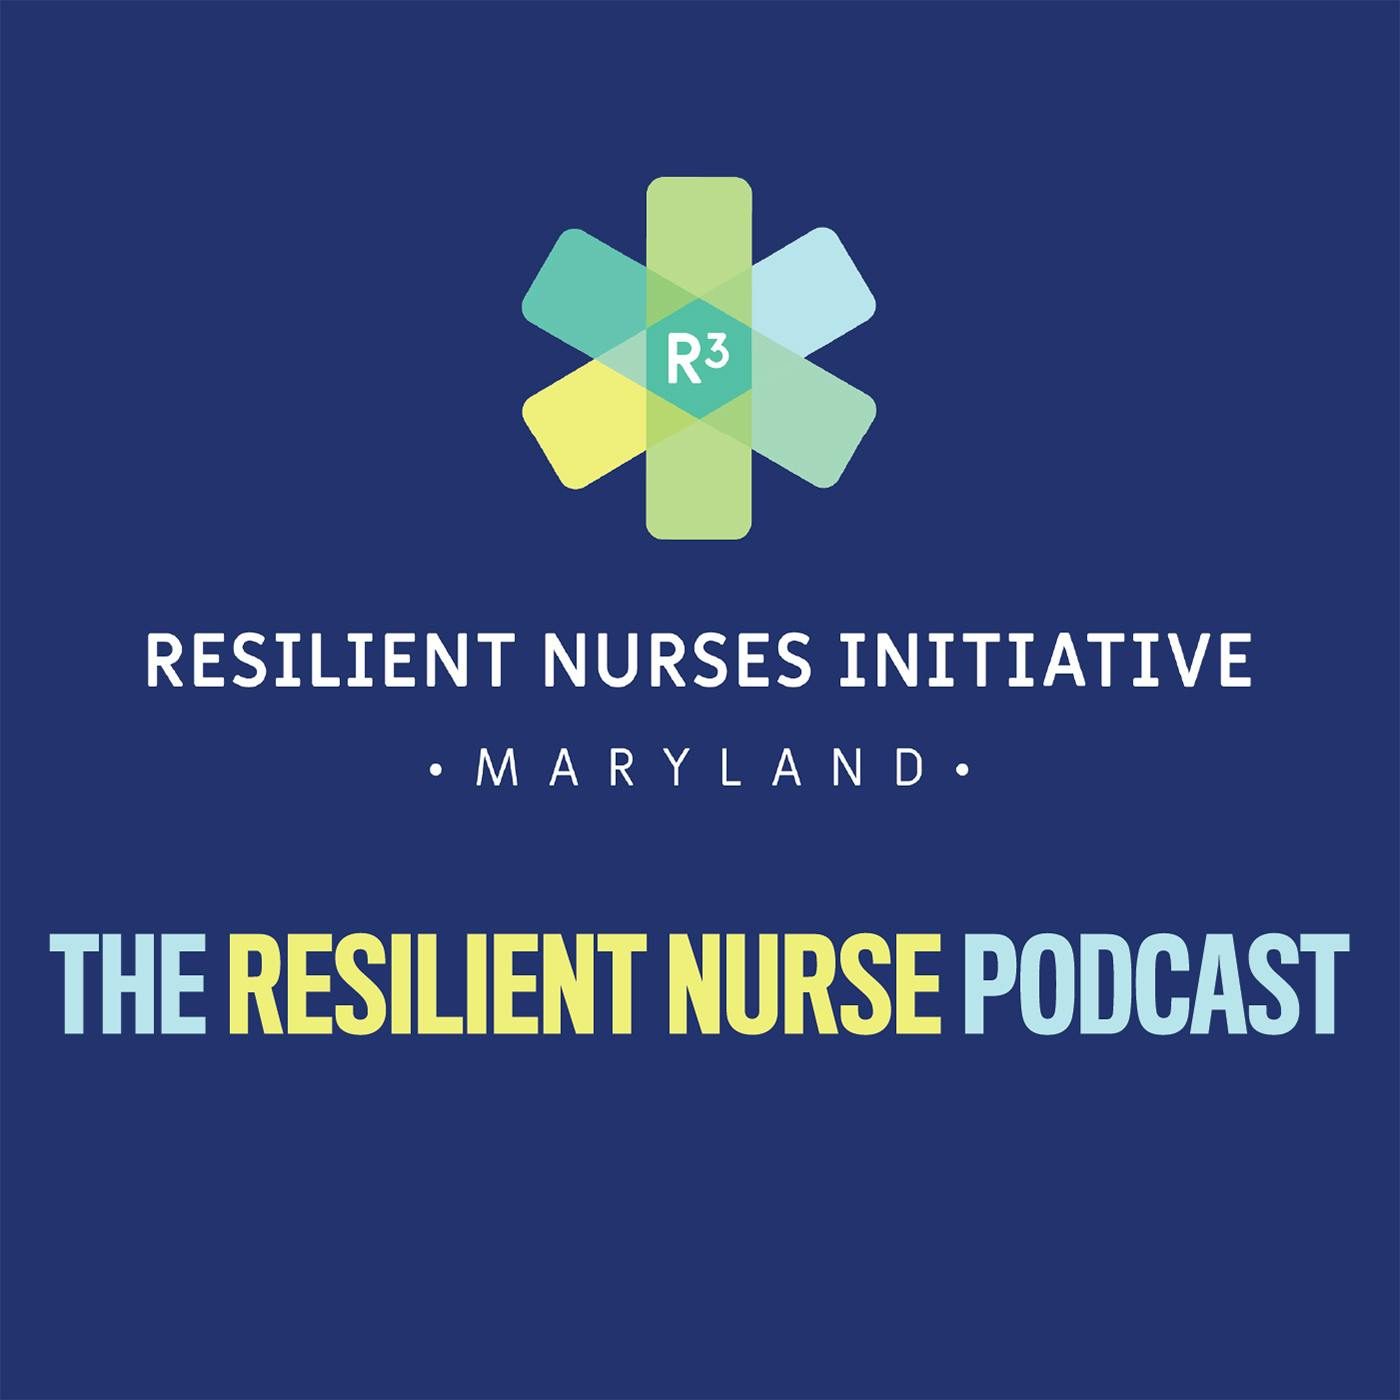 The Resilient Nurse, Episode 3: Speaking Up With Integrity